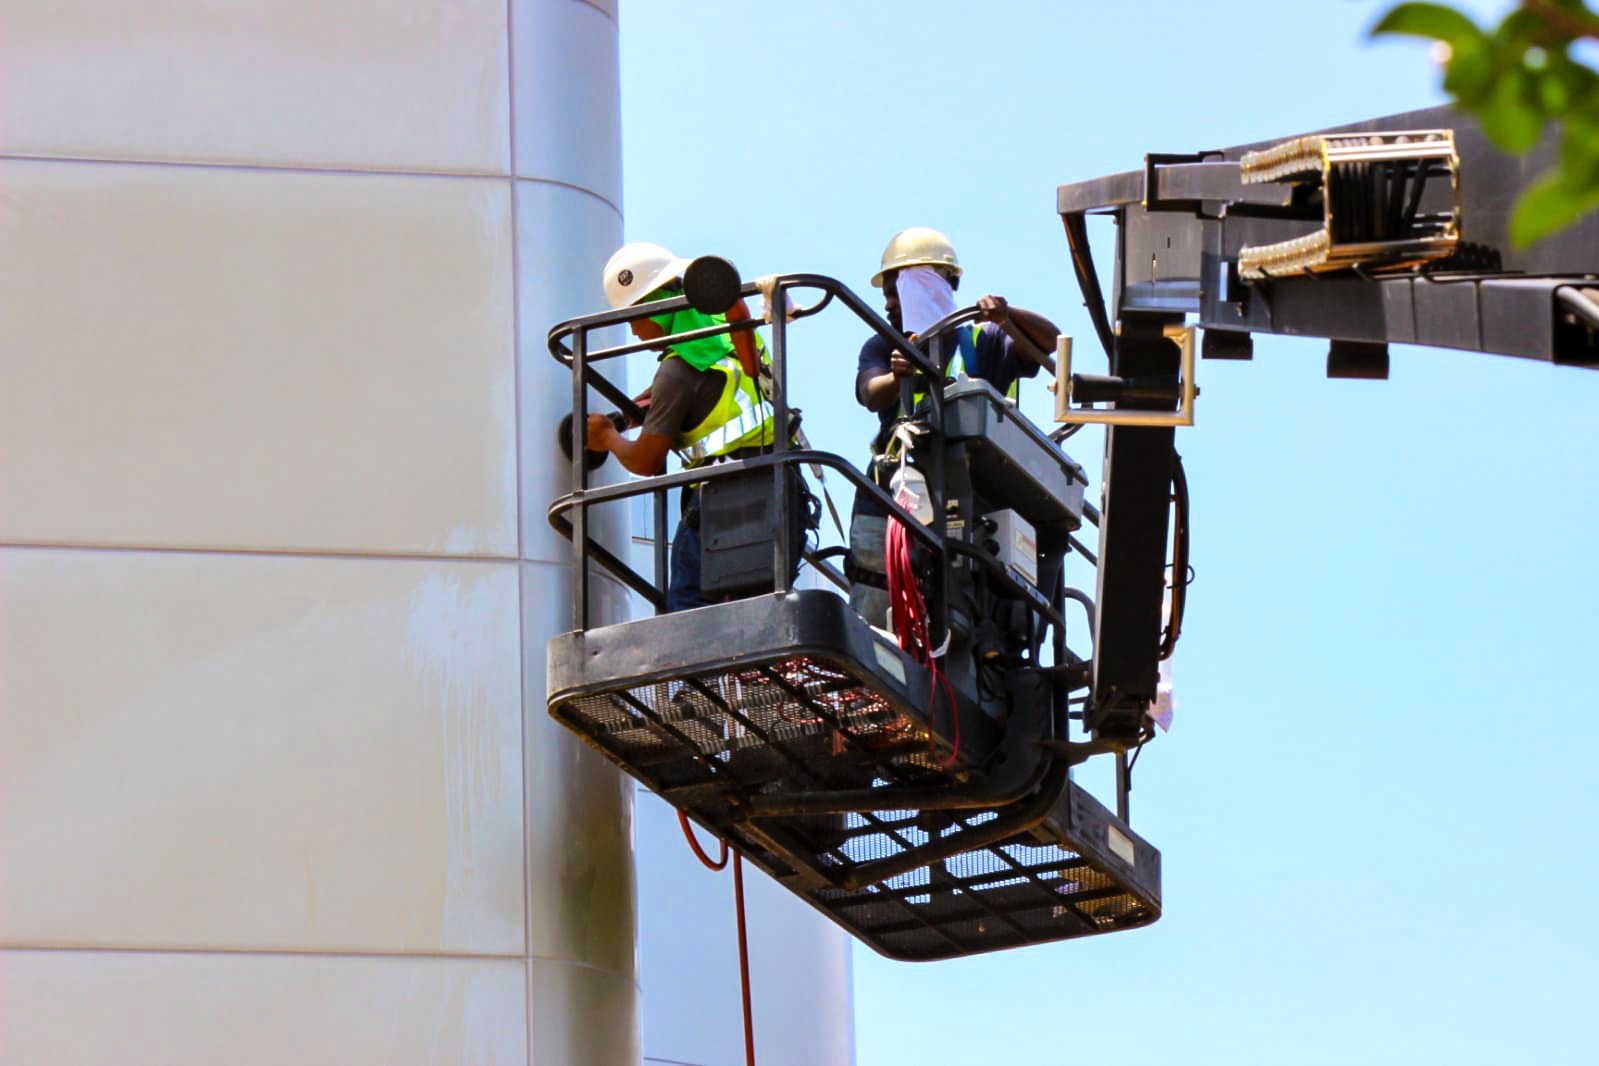 Technicians on crane at Ruby Hicks Hall at Tri-County Technical College in Pendleton, SC